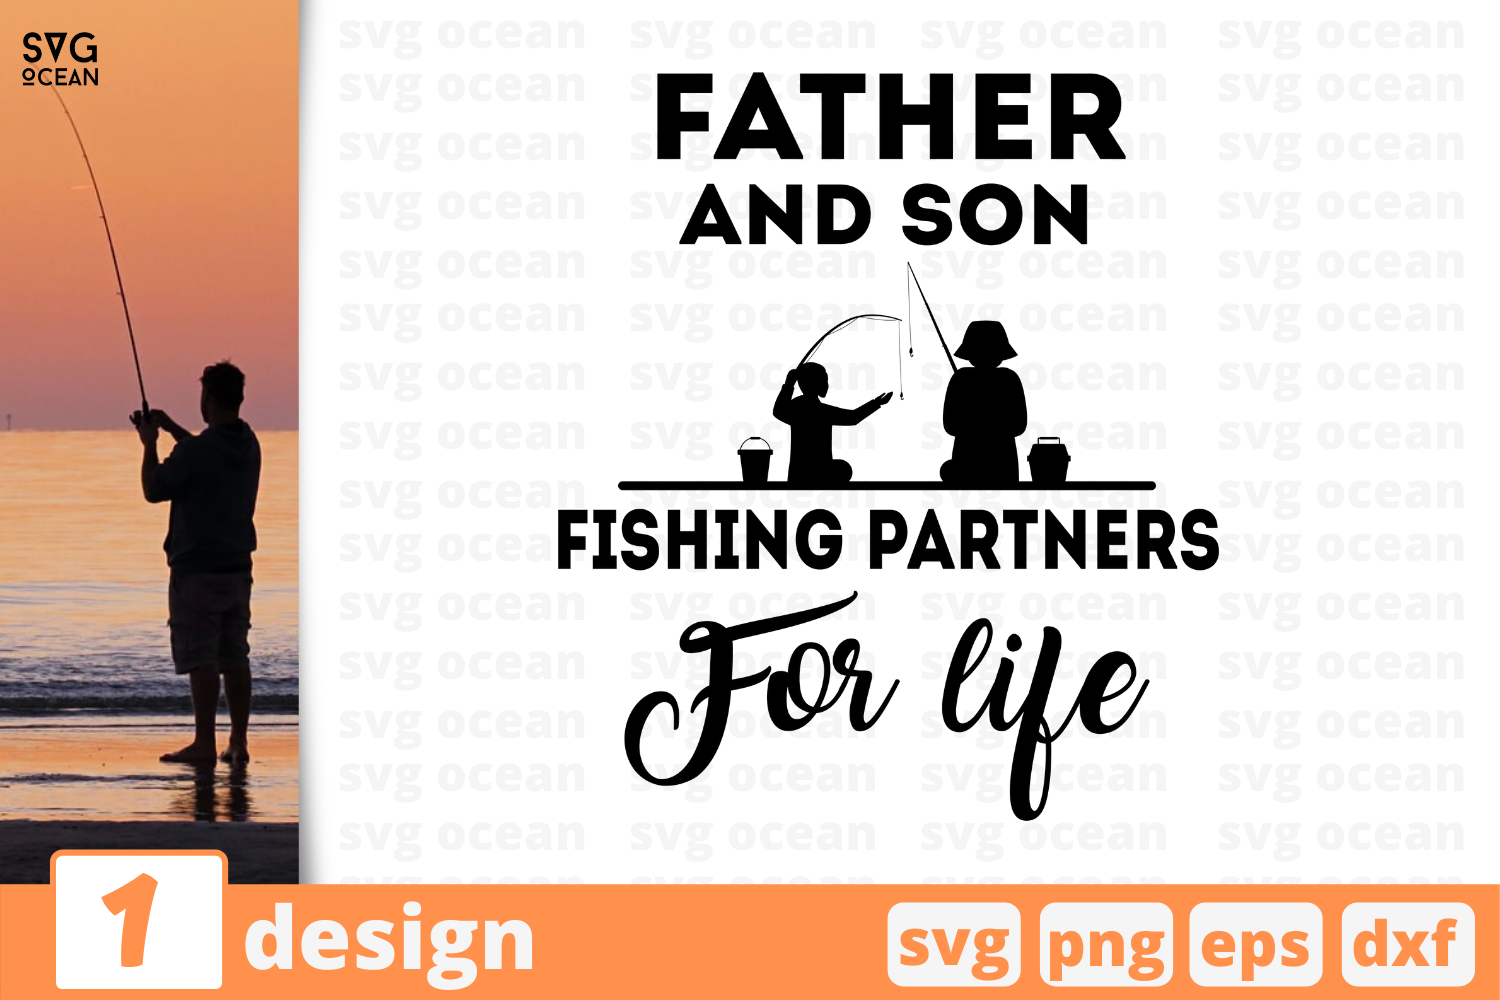 Download 1 Father And Son Fishing Partners Svg Bundle Quotes Cricut Svg By Svgocean Thehungryjpeg Com